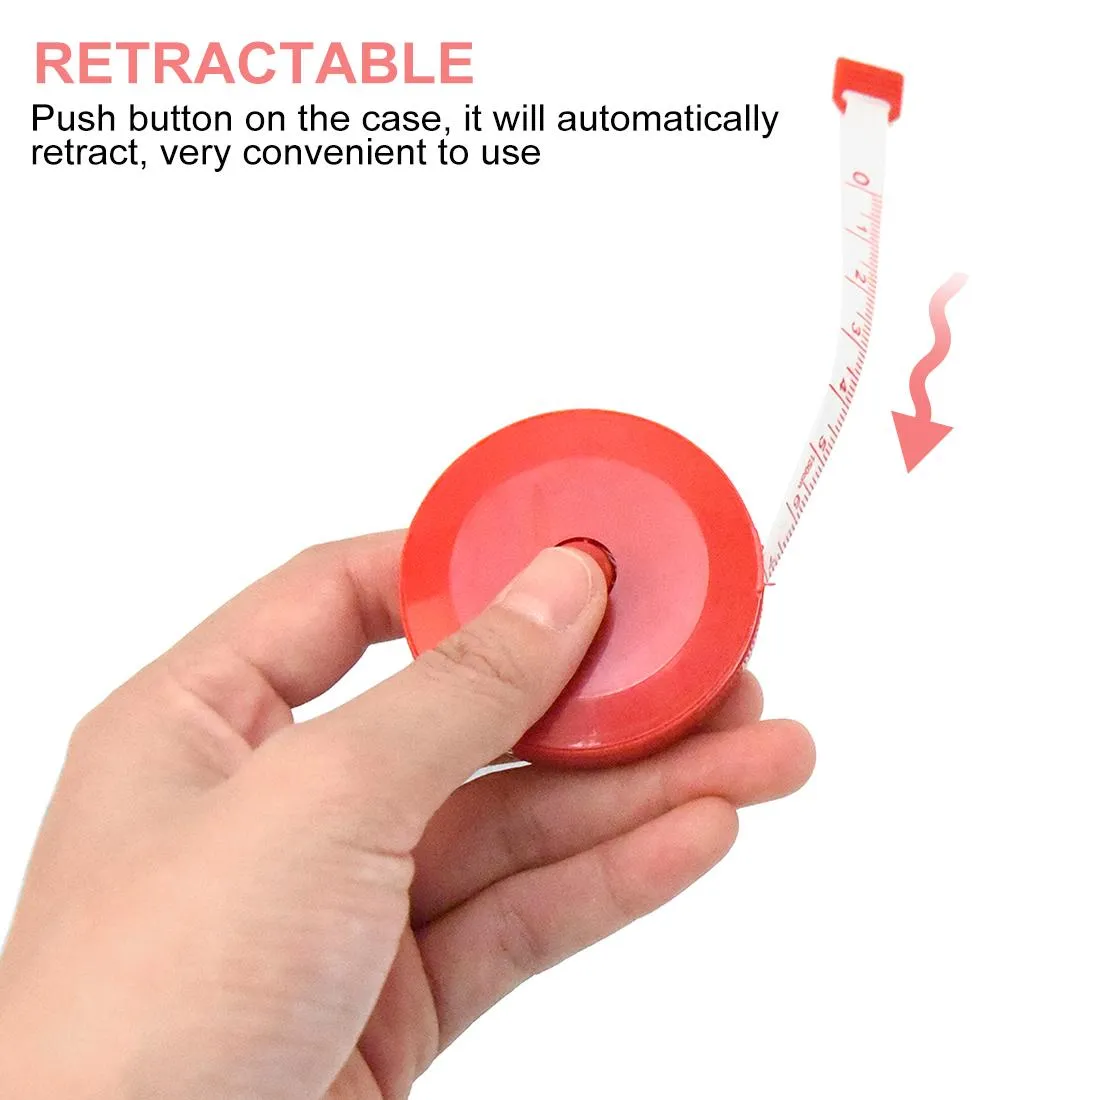 Wholesale Flexible Mini Push Button Self Adhesive Measuring Tape 150cm,  Round Ruler With Random Color From Ewin24, $1.93